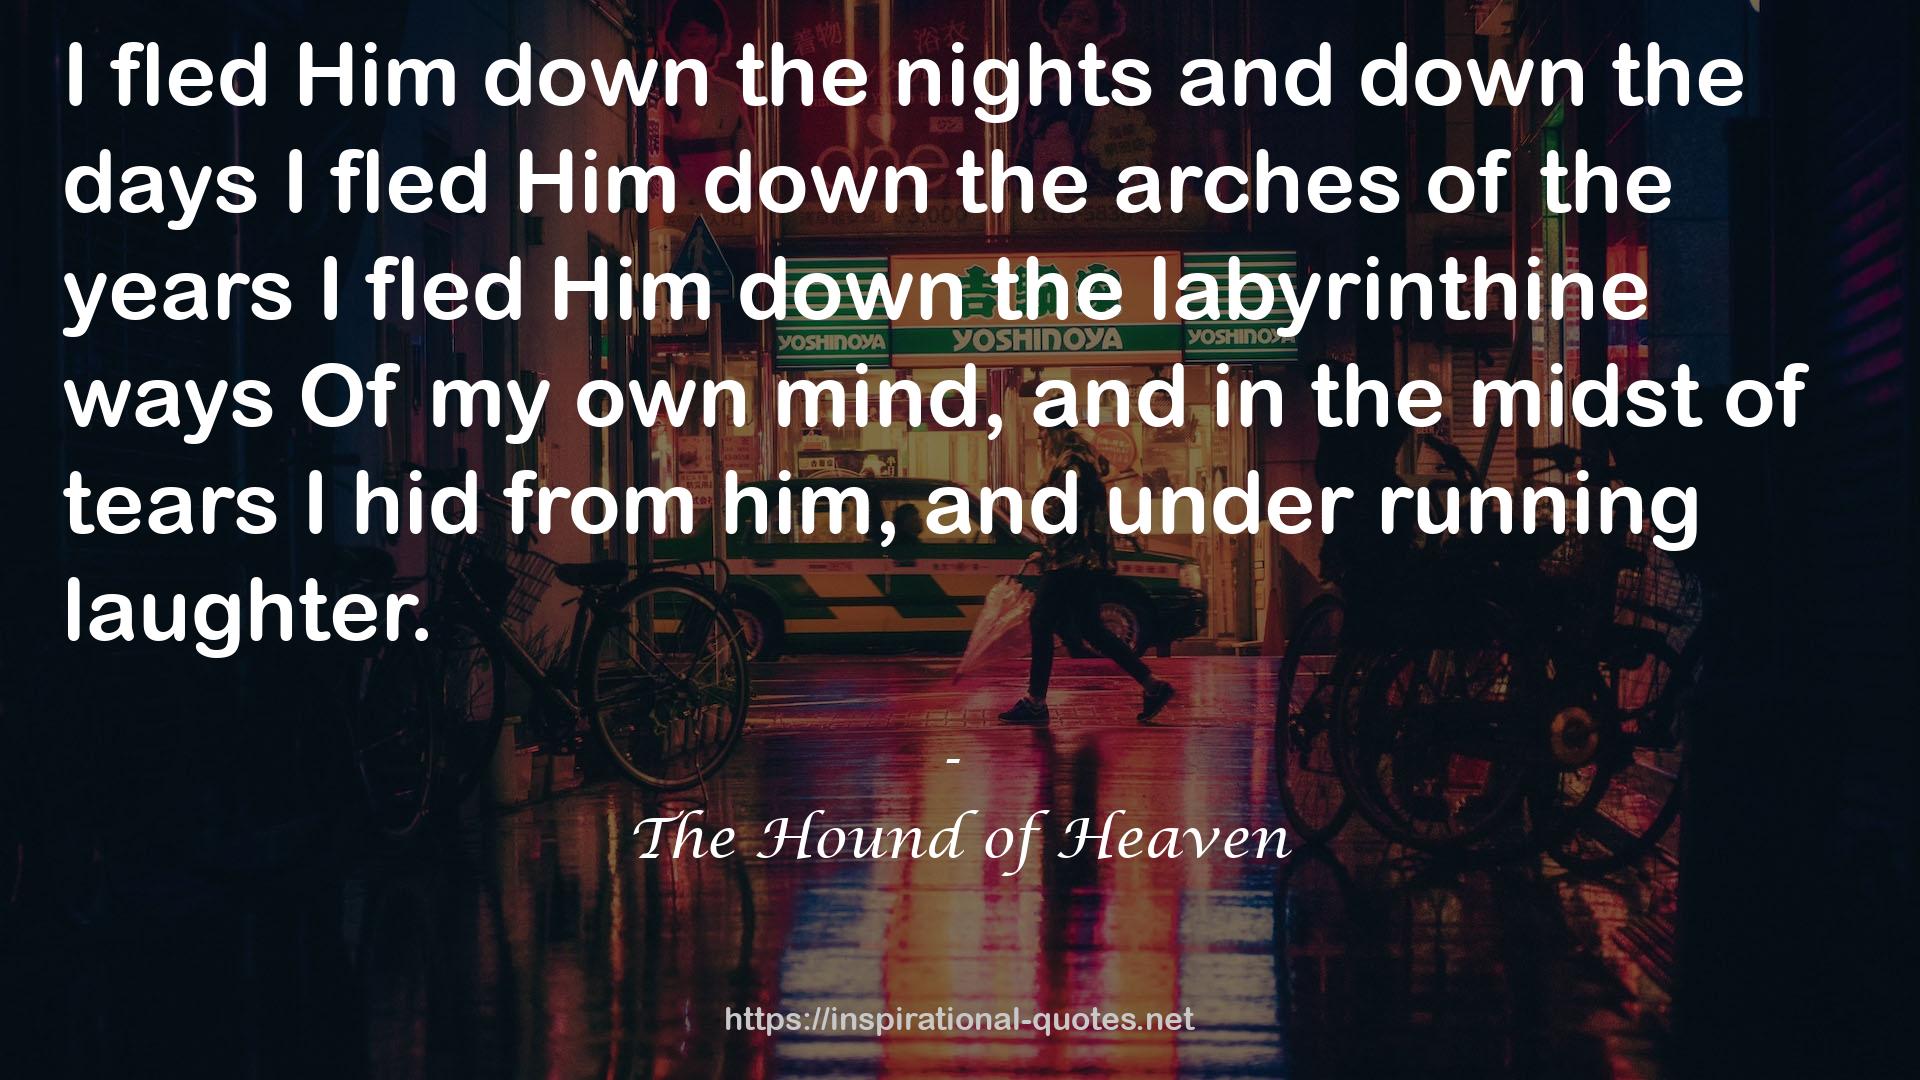 The Hound of Heaven QUOTES